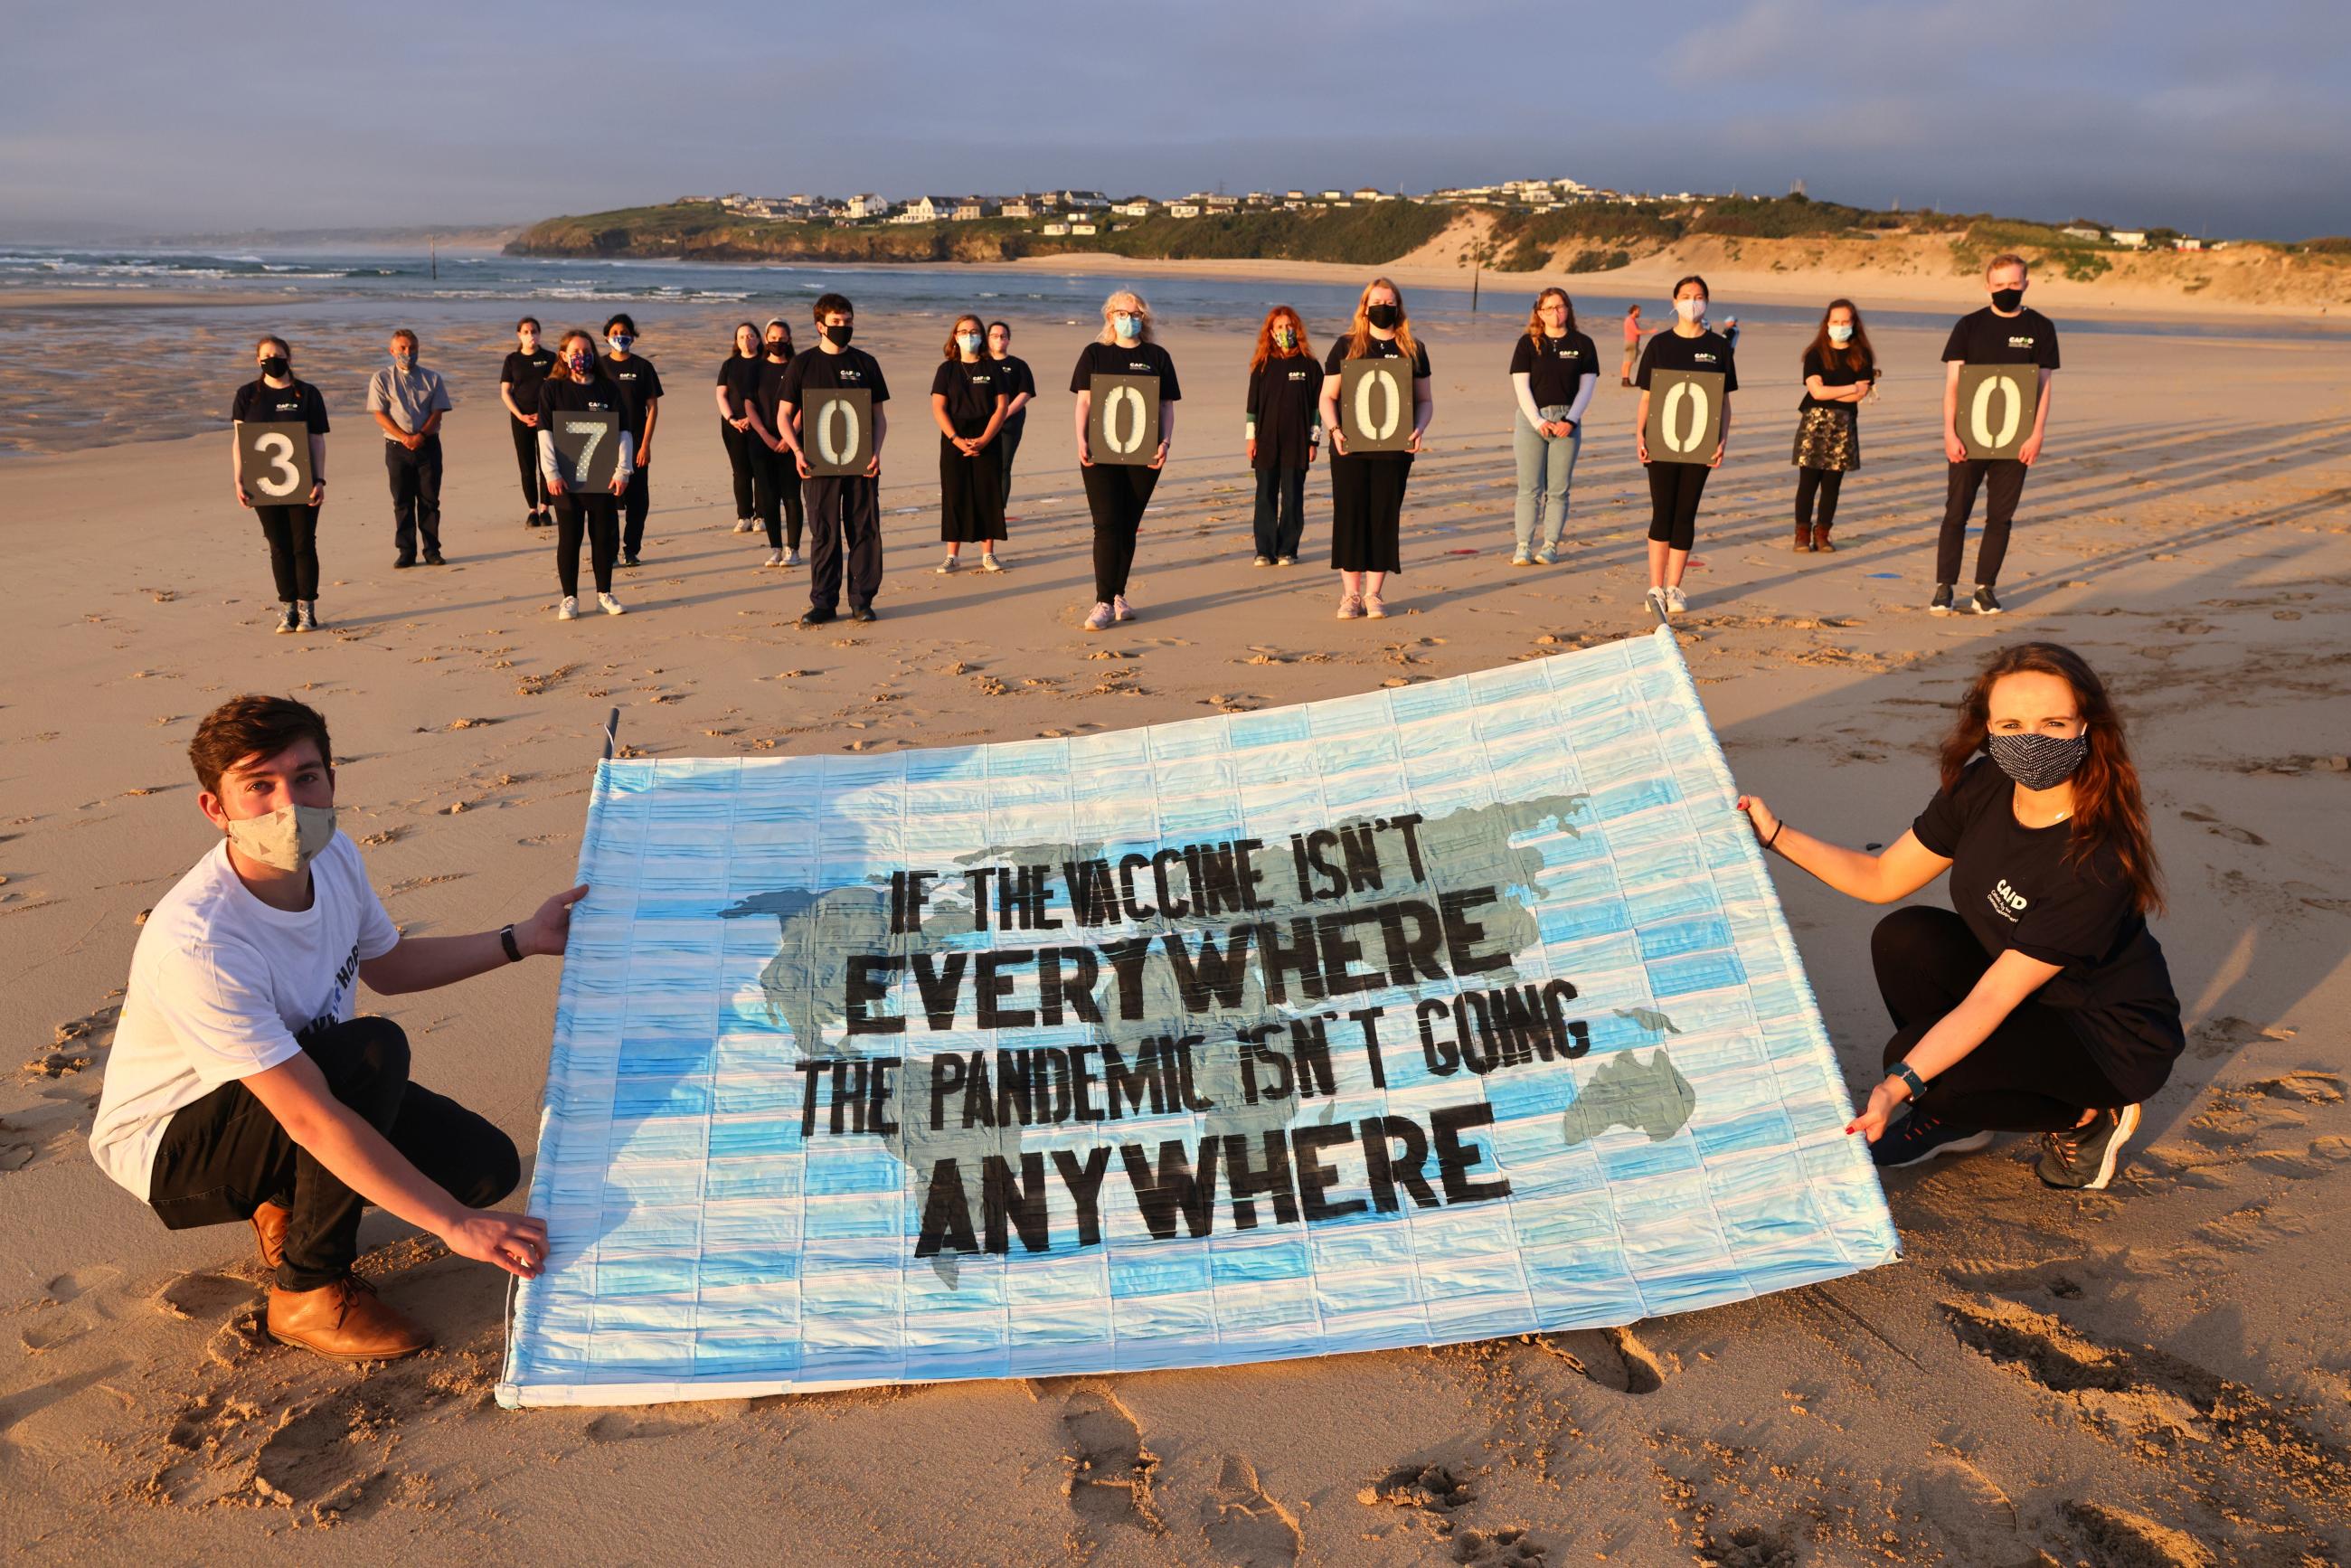 Activists hold a sign that reads, "If the vaccine isn't everywhere, the pandemic isn't going anywhere" on a beach in Cornwall, Britain.